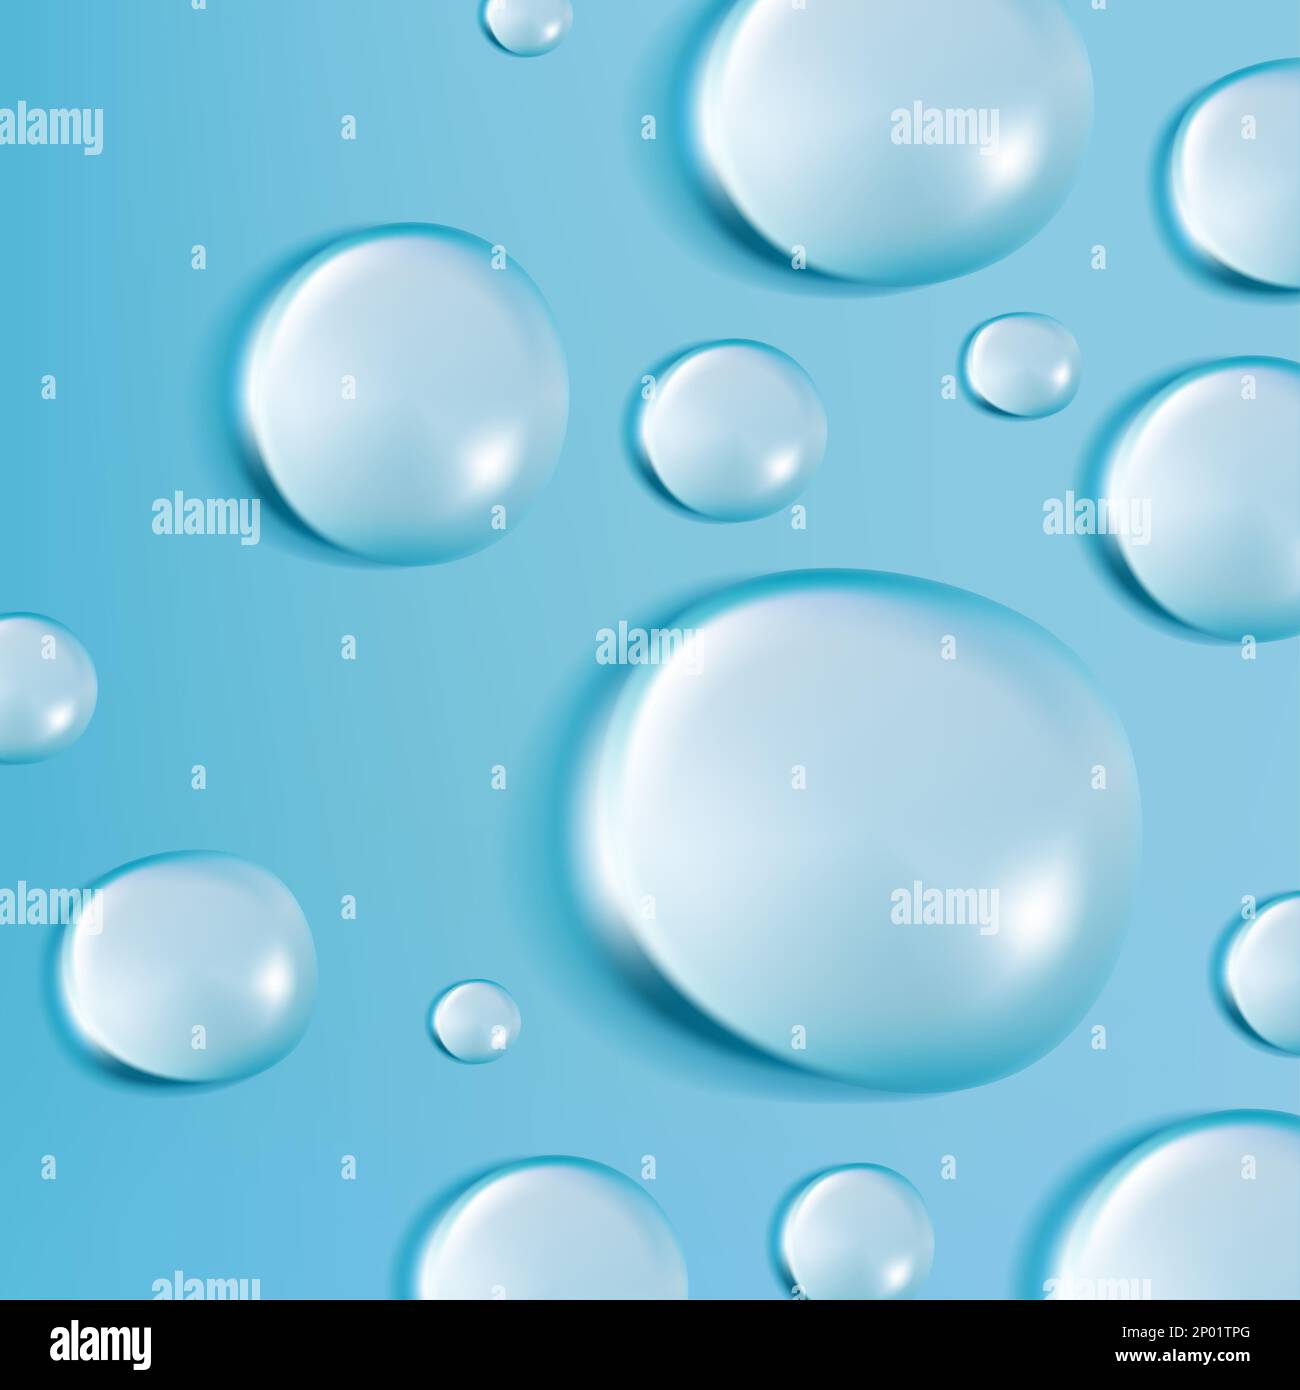 Vector Realistic Water Drops Illustration for Poster, Book Cover or Advertisement Background. Light Blue. Stock Photo